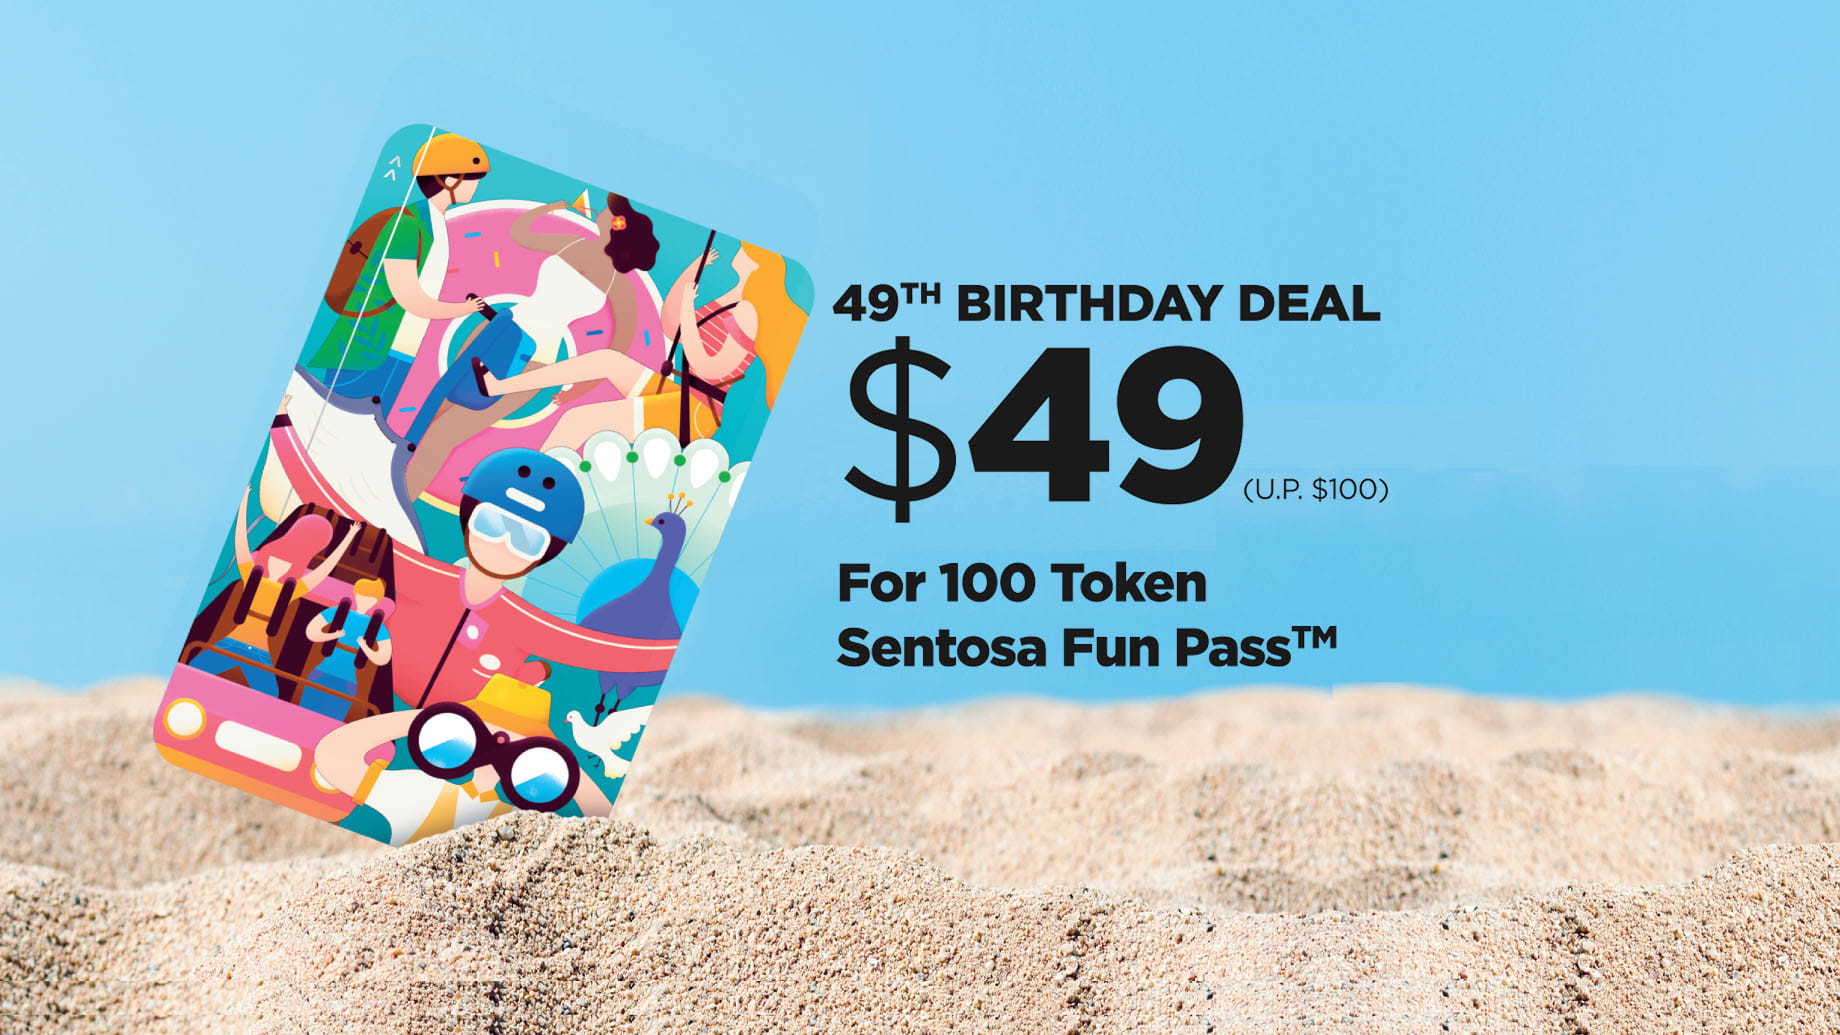 Sentosa 49th Birthday Deal, 100 Tokens Fun Pass at only $49